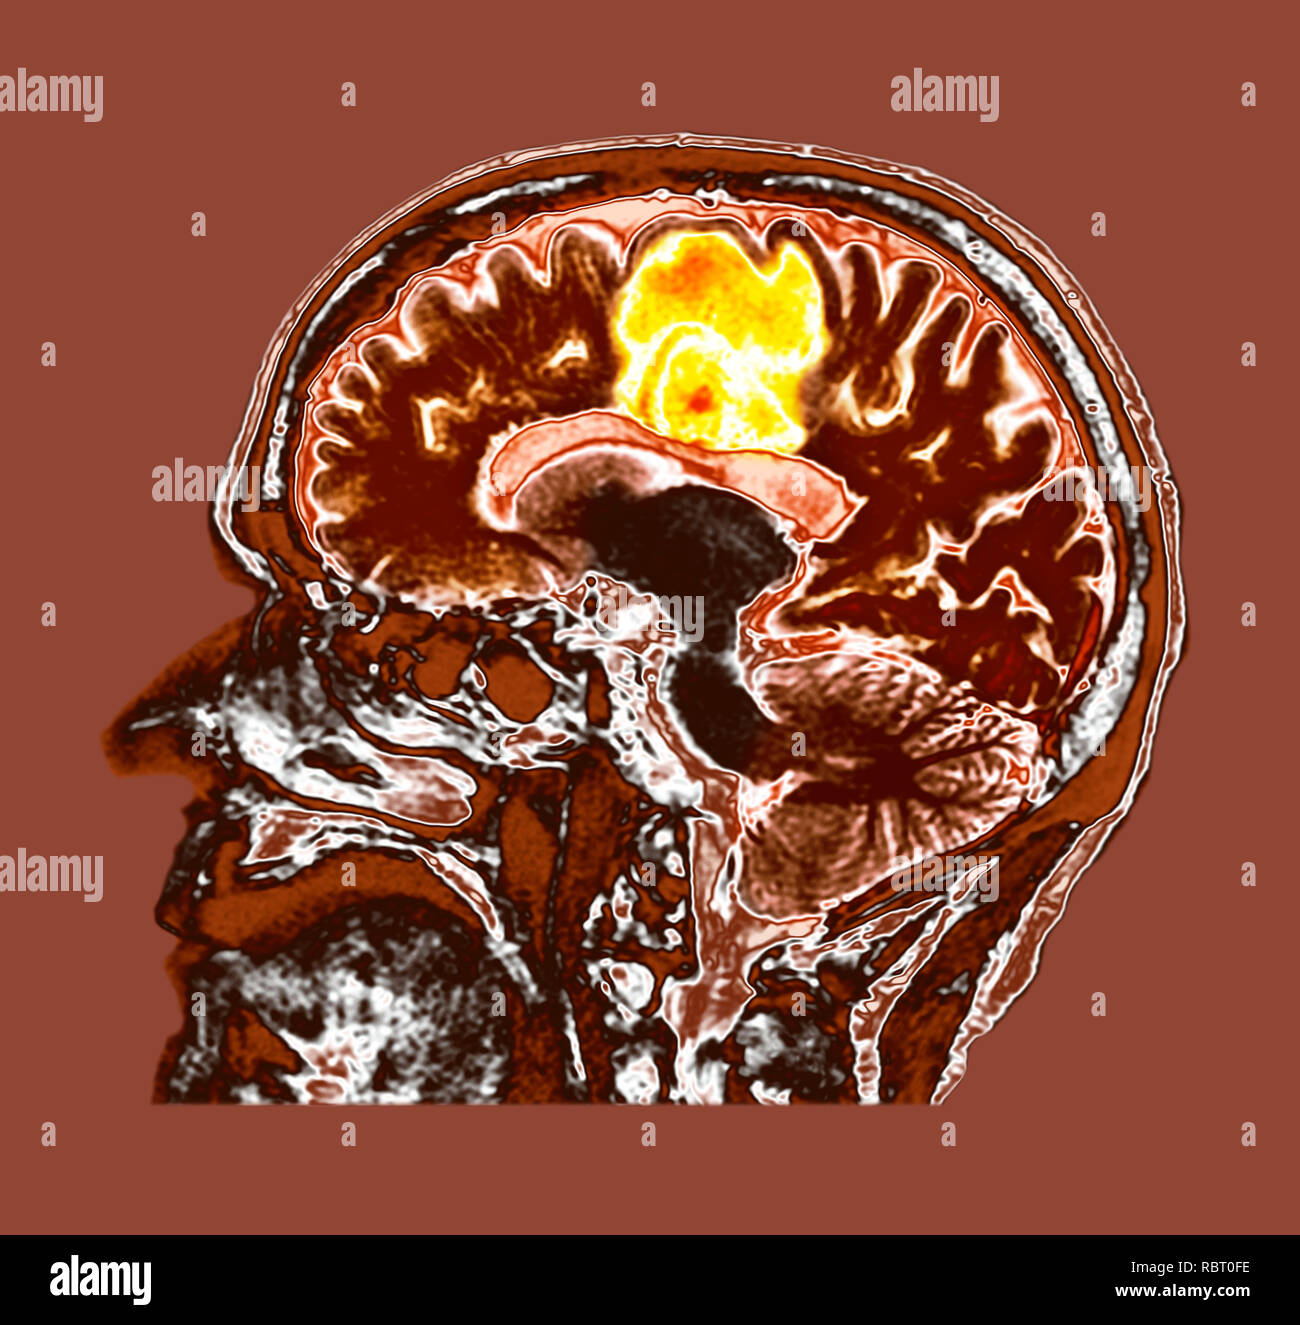 Glioblastoma brain cancer. Coloured computed tomography (CT) scan of a section through the brain of an 84-year-old female patient with glioblastoma (yellow, top). Glioblastoma is the most aggressive form of brain cancer. Treatment involves surgery, after which chemotherapy and radiation therapy are used. However, the cancer usually reoccurs despite treatment and the most common length of survival after diagnosis is 12-15 months. Without treatment, survival is typically 3 months. Stock Photo